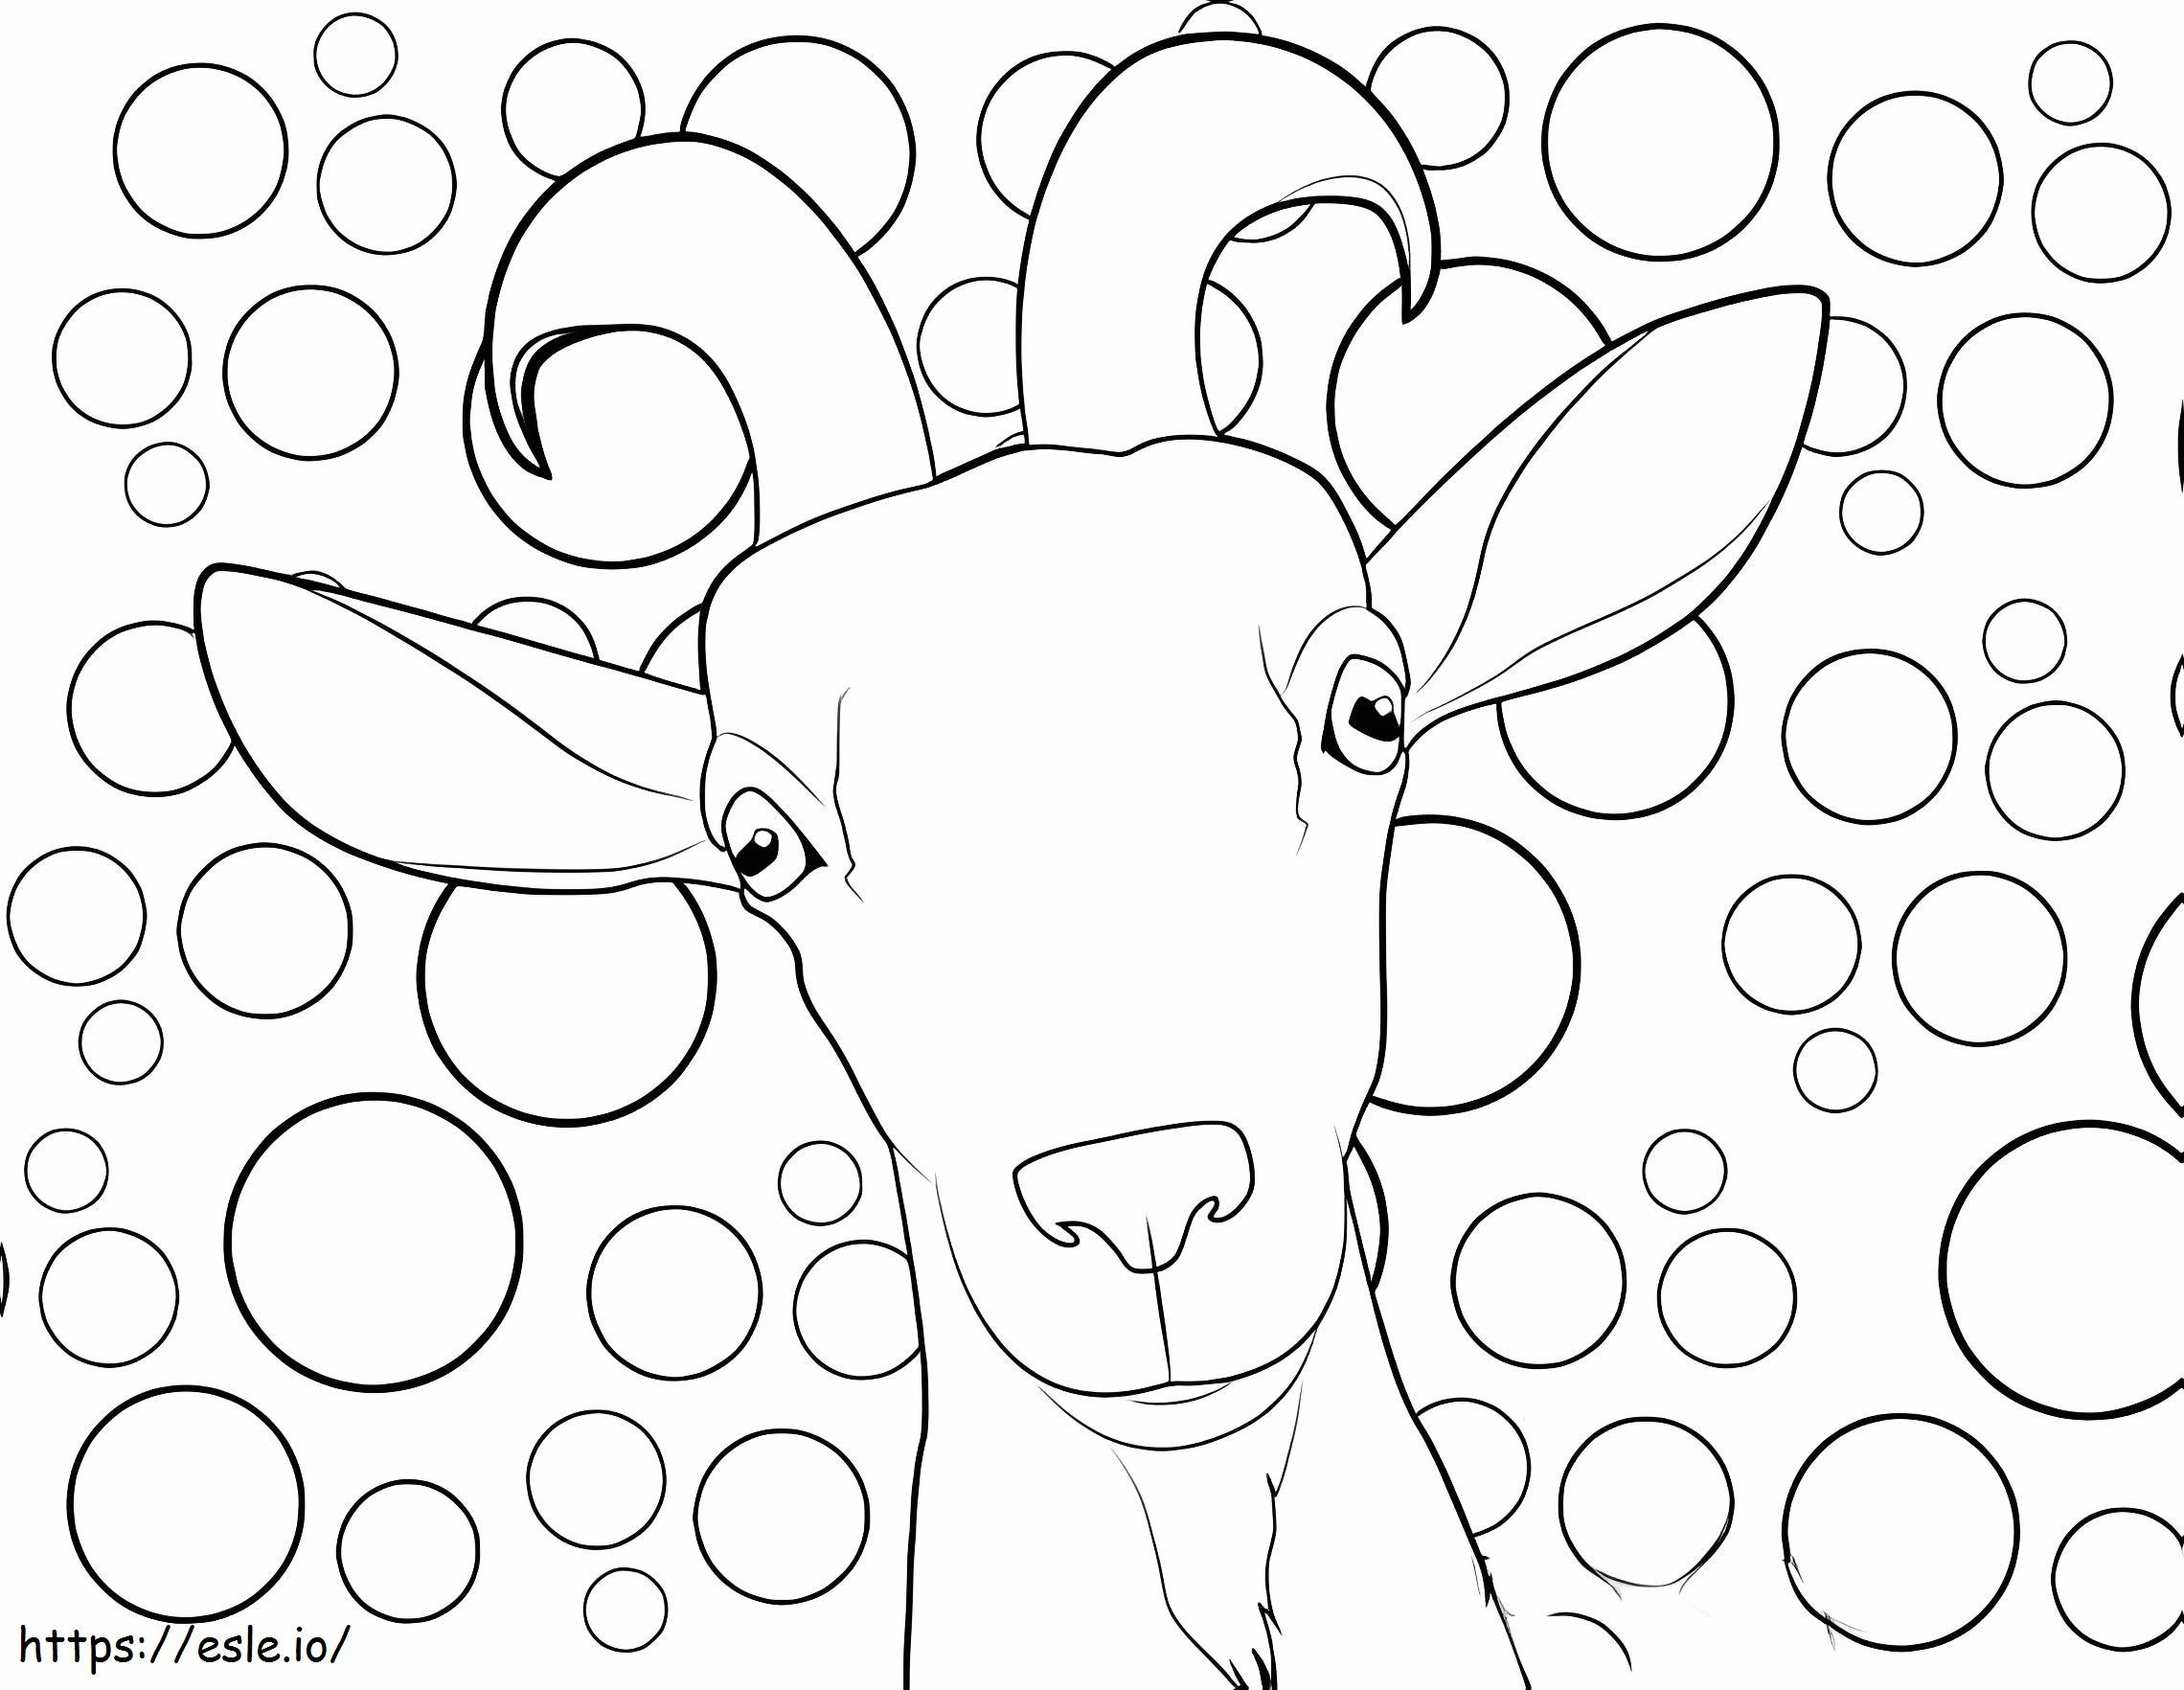 Goat Head coloring page